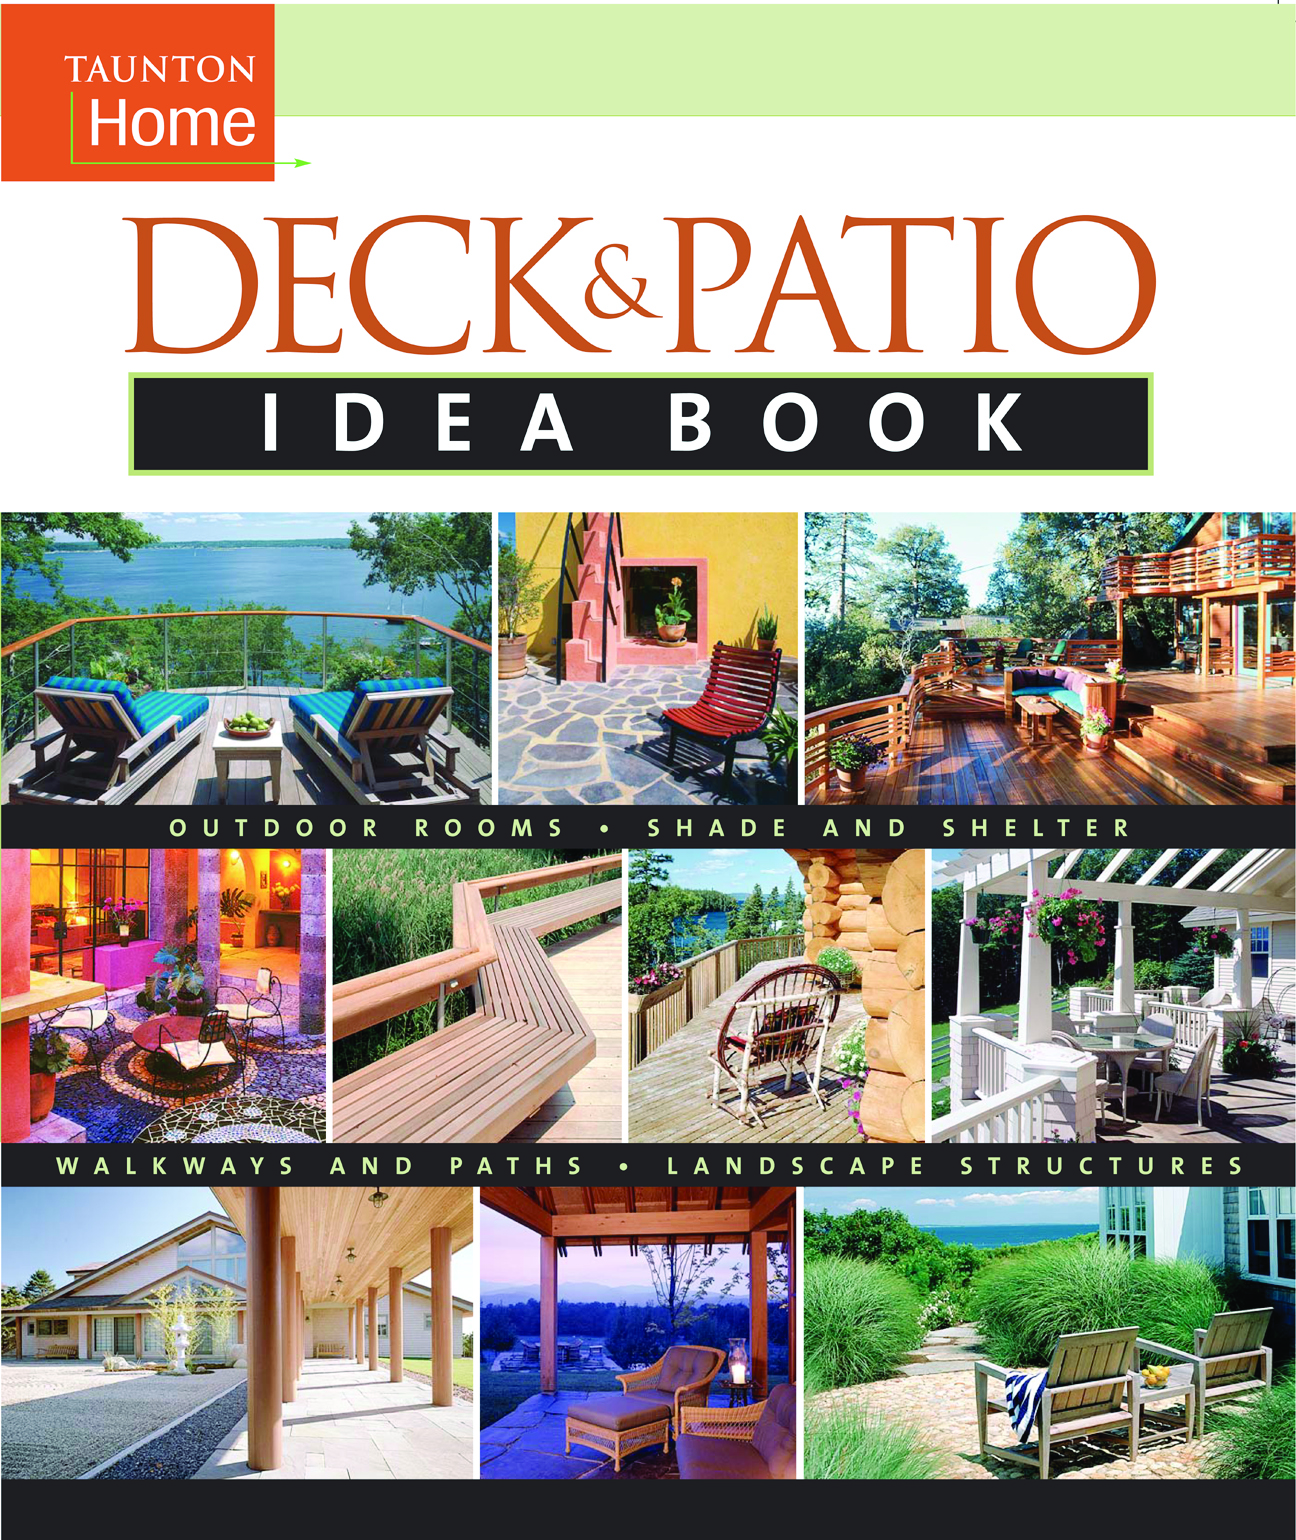 Deck and Patio.jpg